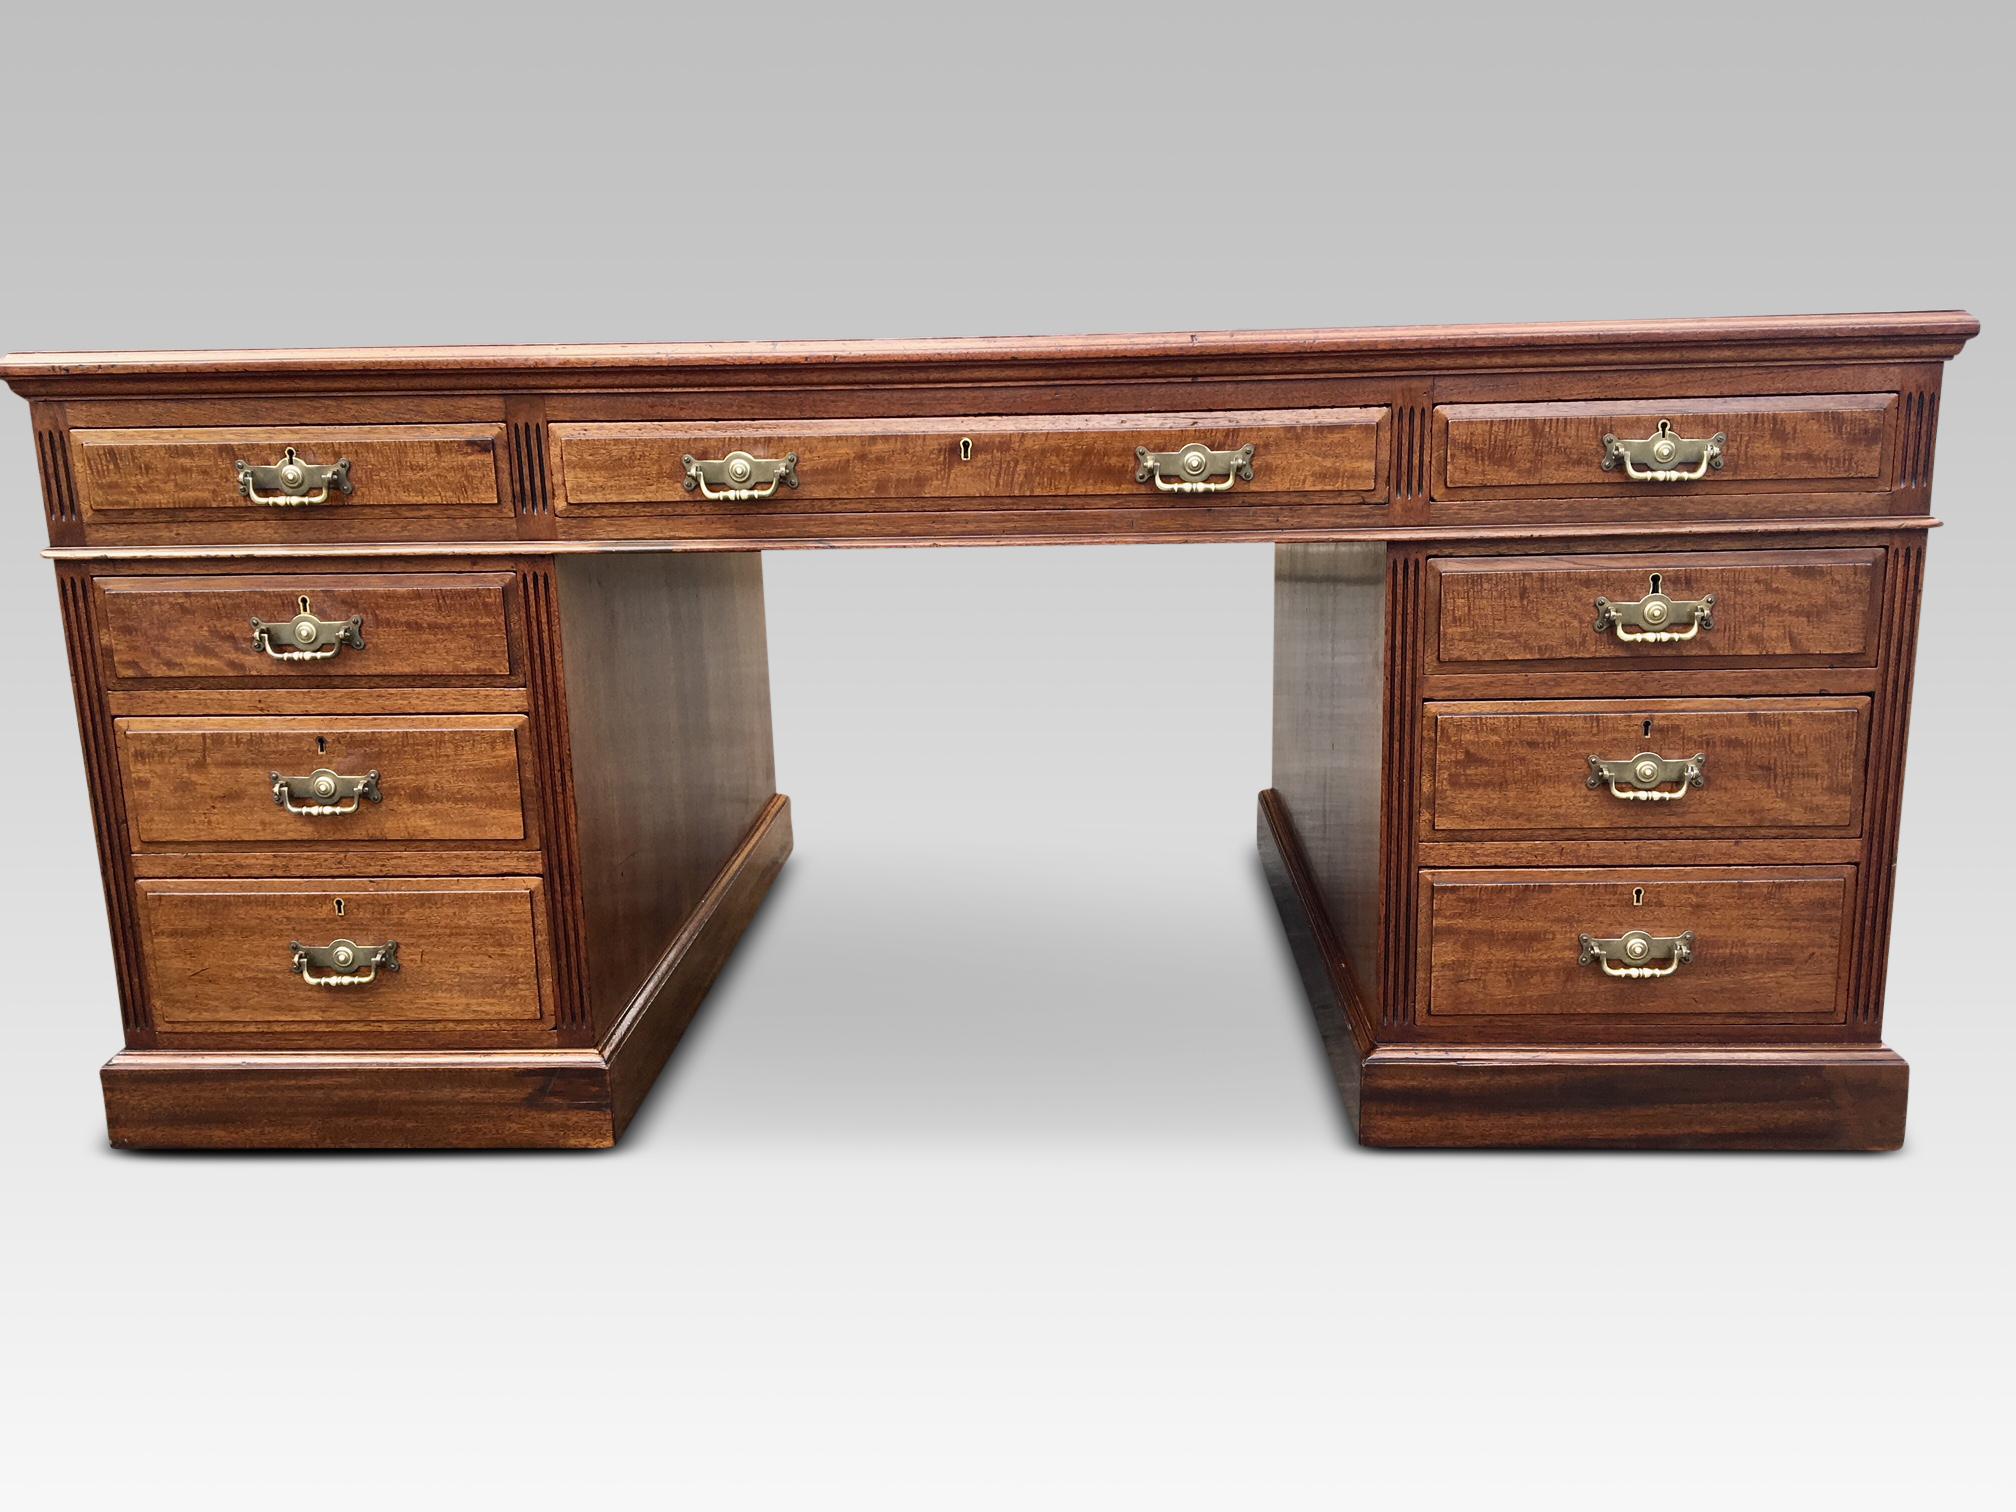 Fine quality 18 drawer Large Mahogany Partners Desk. English, circa 1880s by Maple & Co.
This is a very impressive large desk, ideal for either home or business use with dimensions of 66